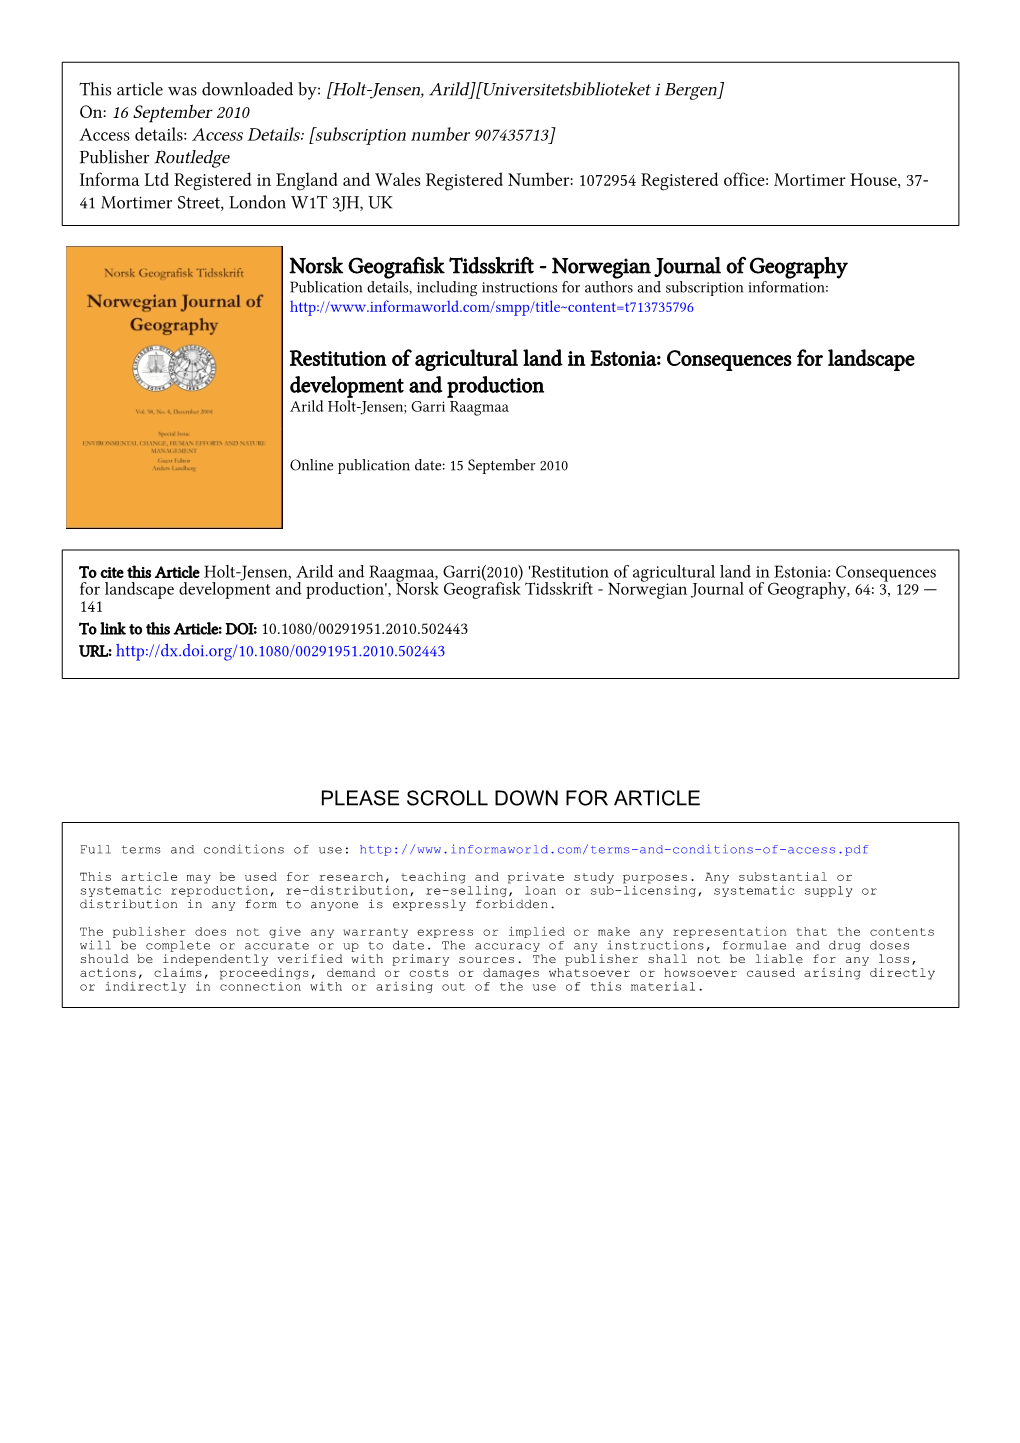 Norwegian Journal of Geography Restitution of Agricultural Land In